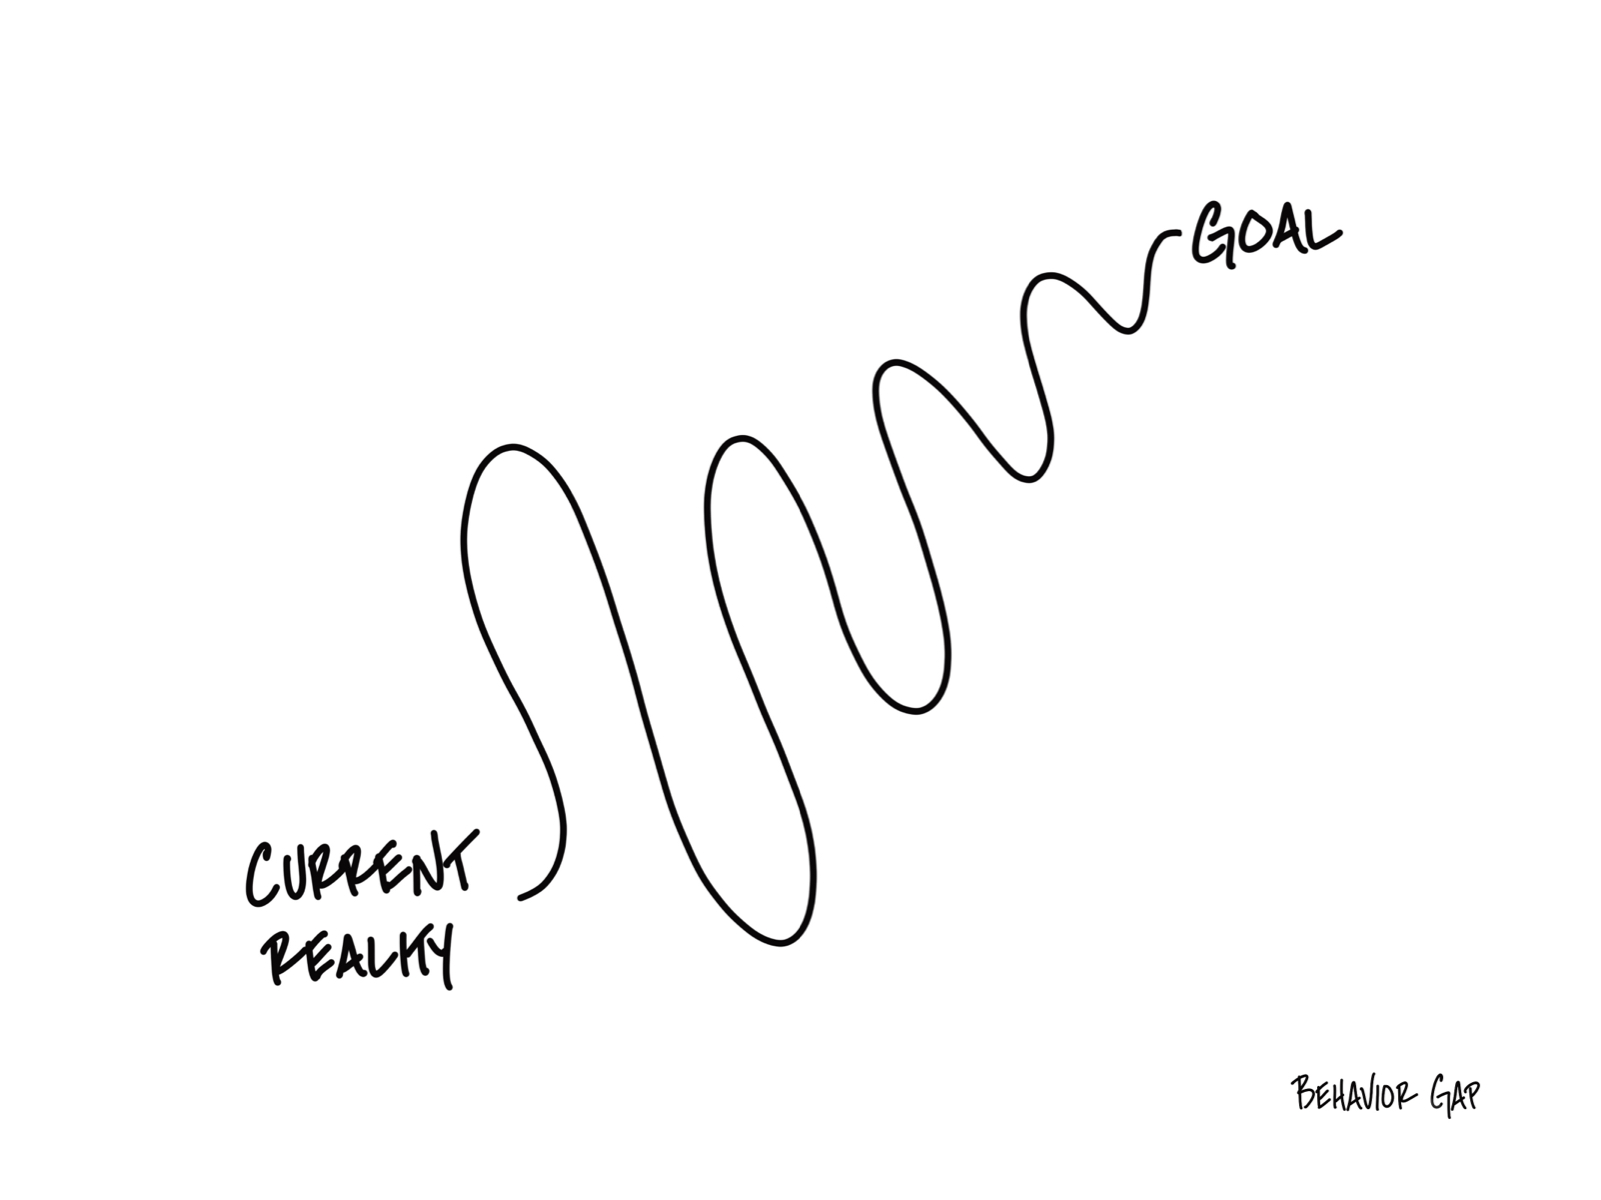 Curvey line from reality to goal illustrating how we build a financial plan